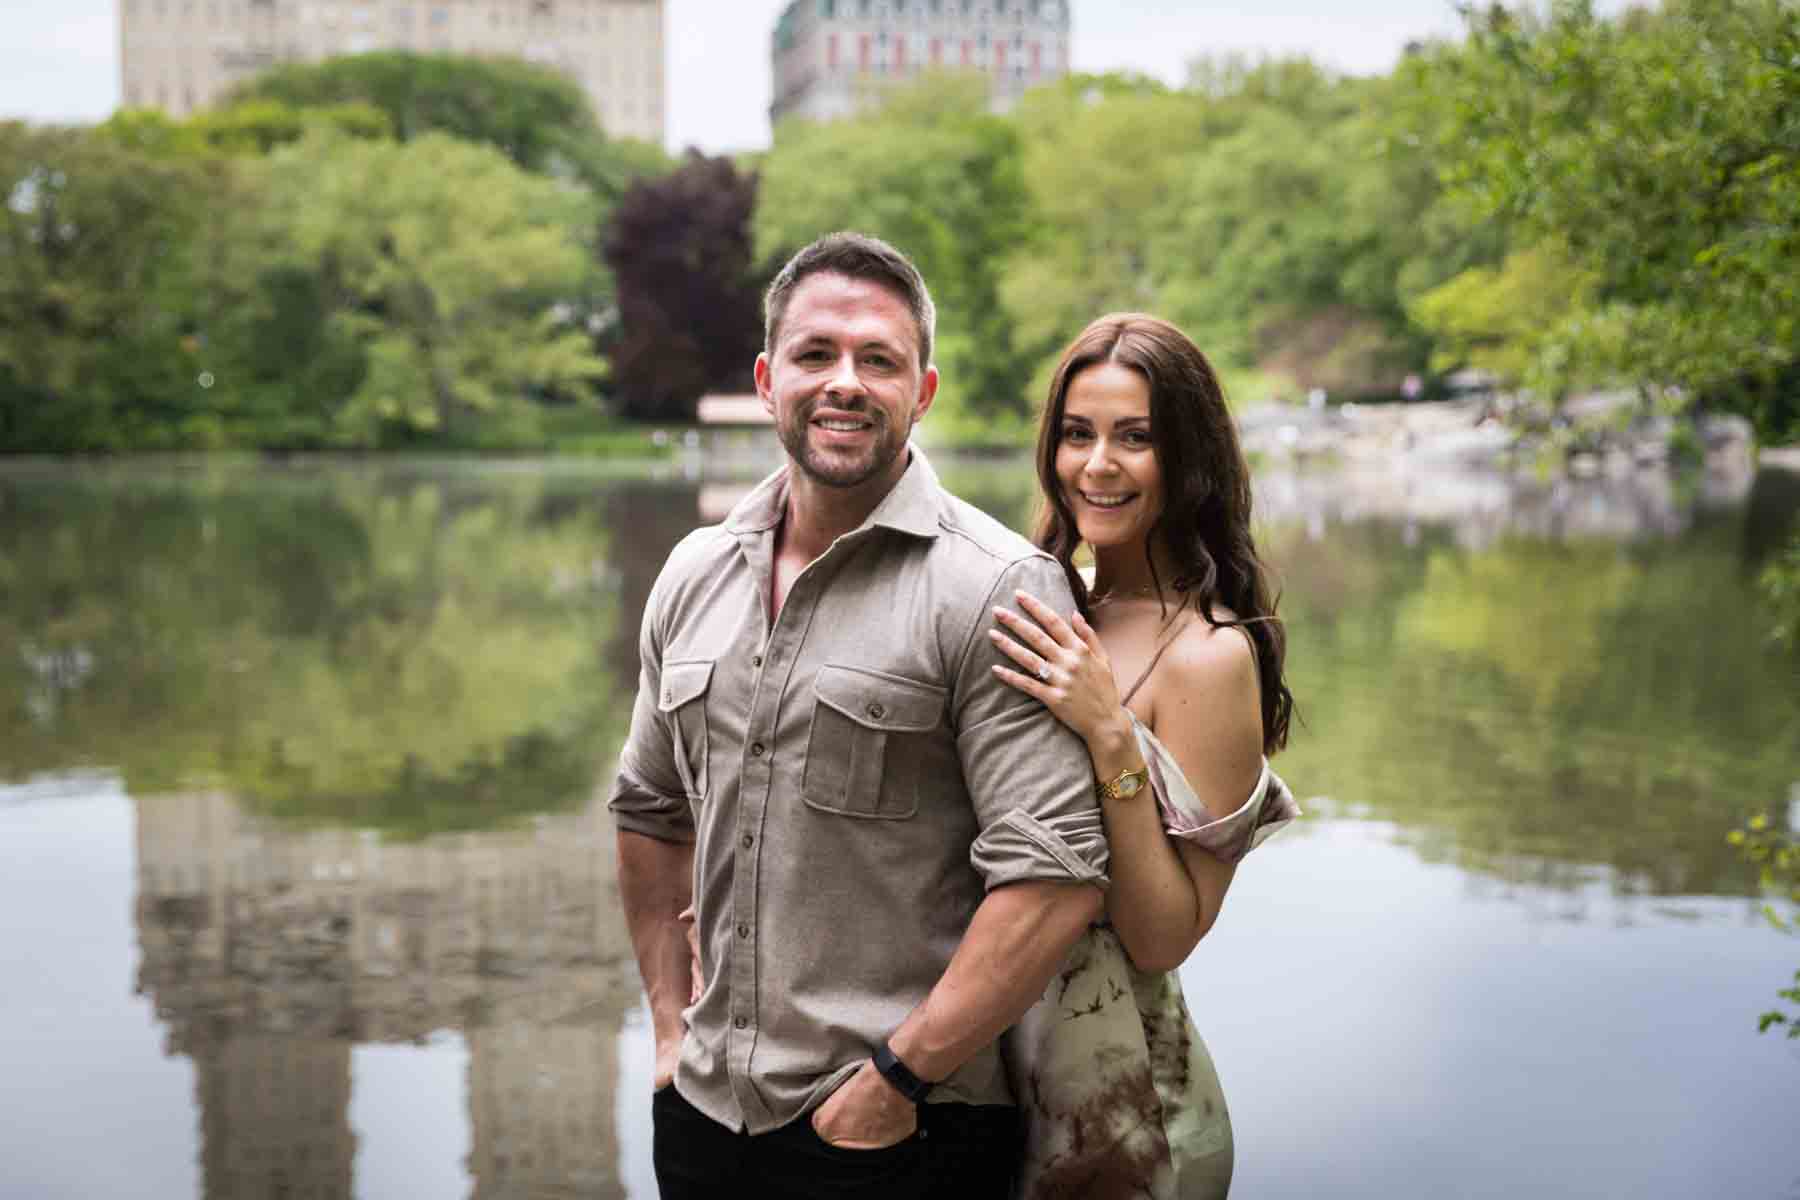 Couple standing in front of lake with buildings reflected in water for an article on the best places to propose in Central Park